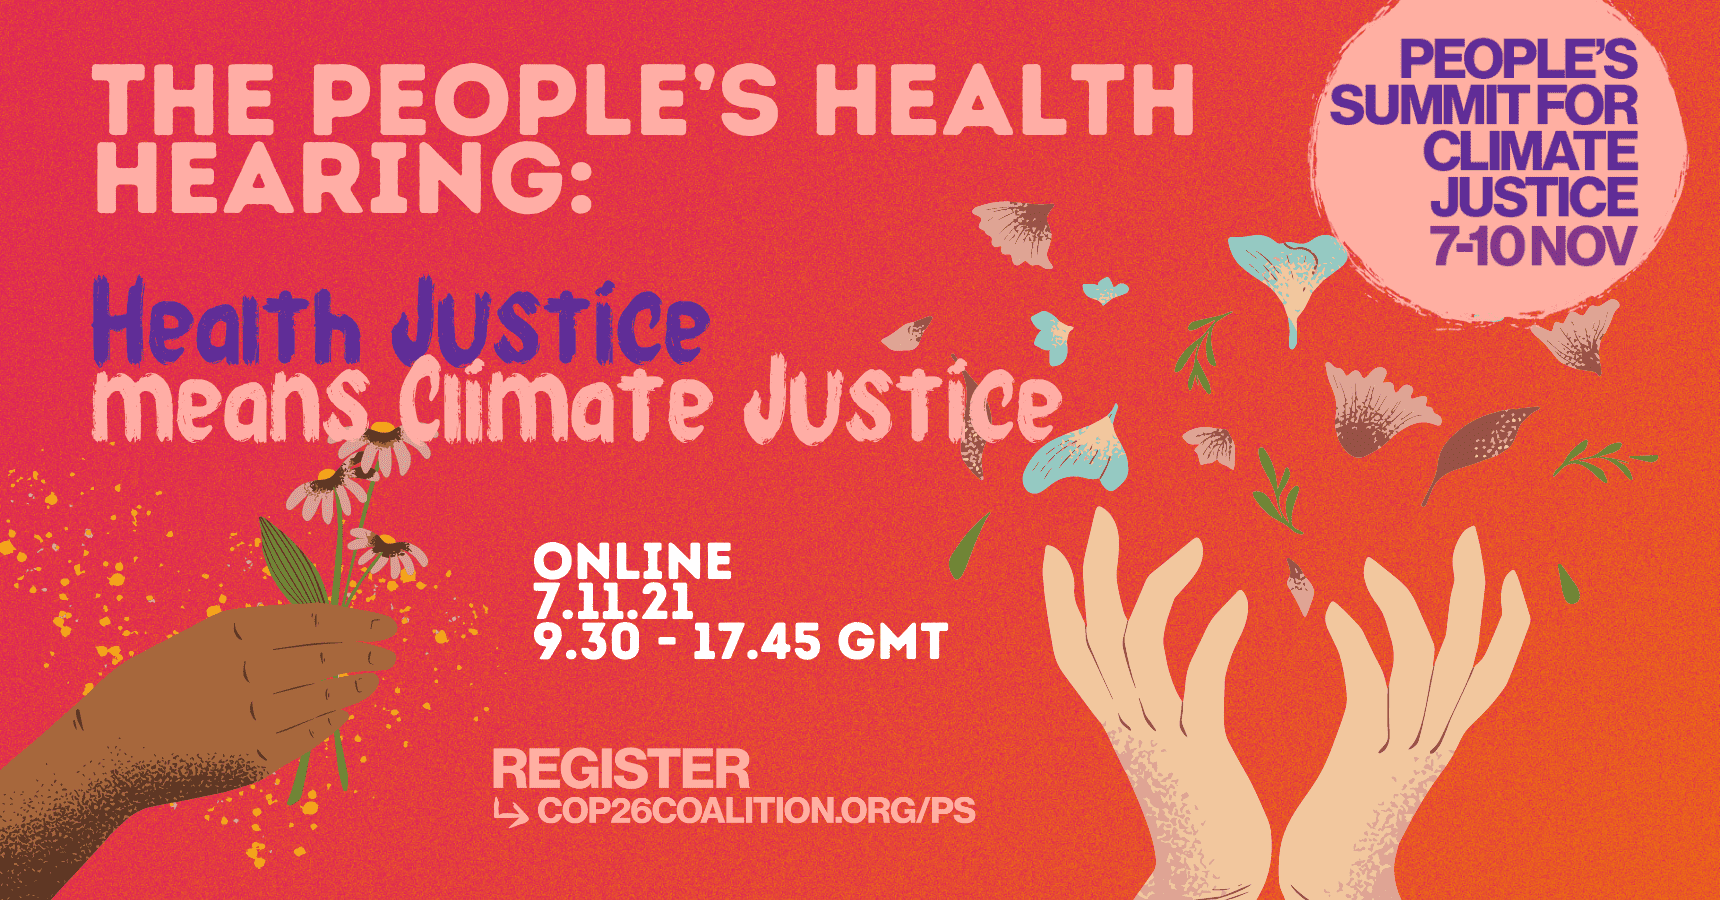 The People's Health Hearing: Health Justice Means Climate Justice. Online, 7.11.21. 9.30 - 17.45 GMT. Register at cop26coalition.org/ps. People's Summit for Climate Justice 7-10 November.